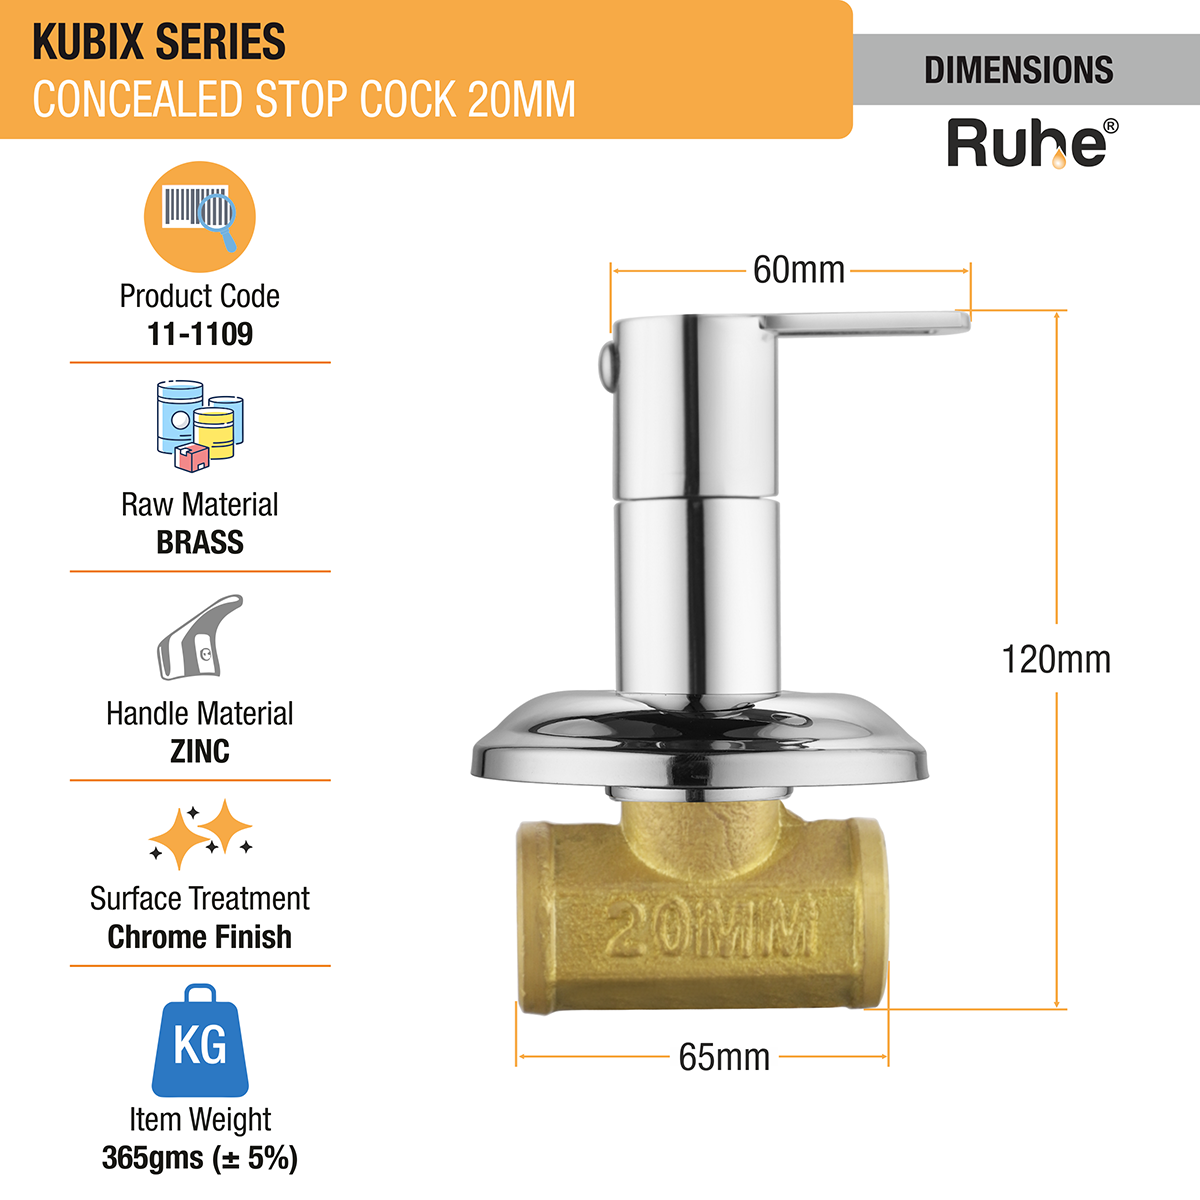 Kubix Concealed Stop Valve Brass Faucet (20mm) dimensions and size